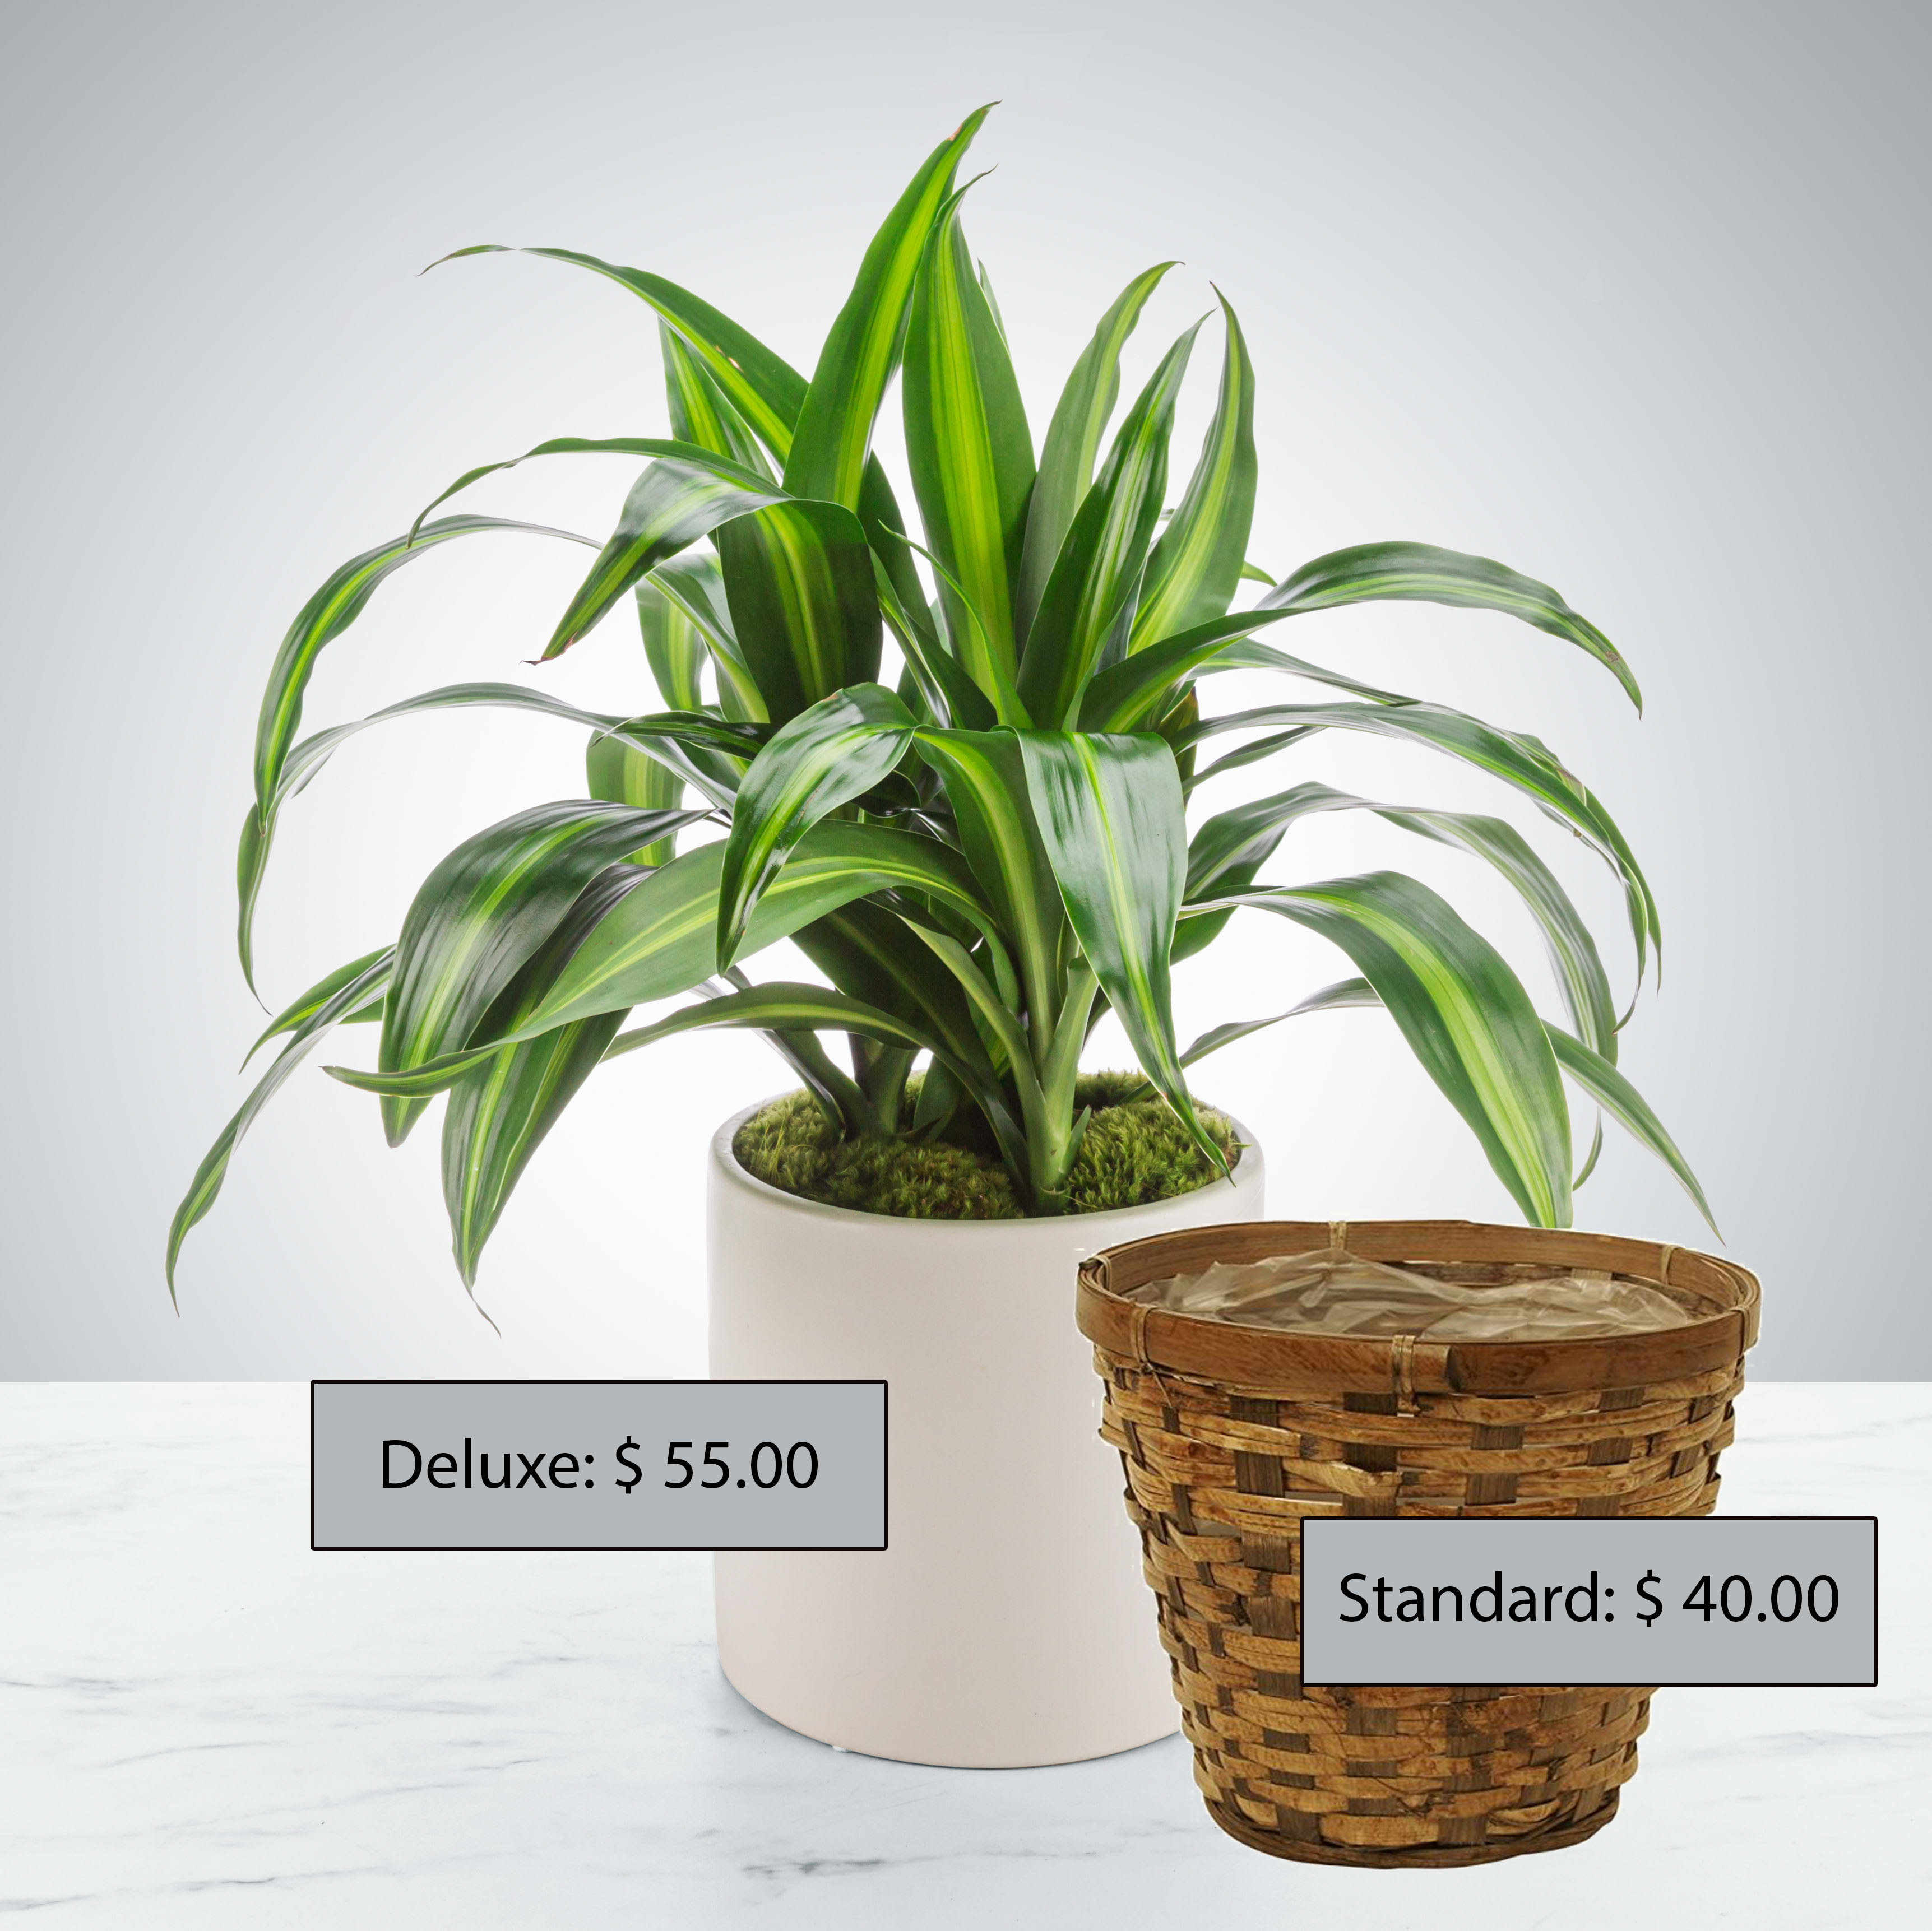 Dracaena Plant by BloomNation™ - Named after dragons and referred to as the dragon plant, these plants do an excellent job filtering the air, looking pretty, and being relatively sturdy. Send them to your favorite plant parent or plant newbie. This plant is potted in a basket/pot that is Approx. 6in in diameter.